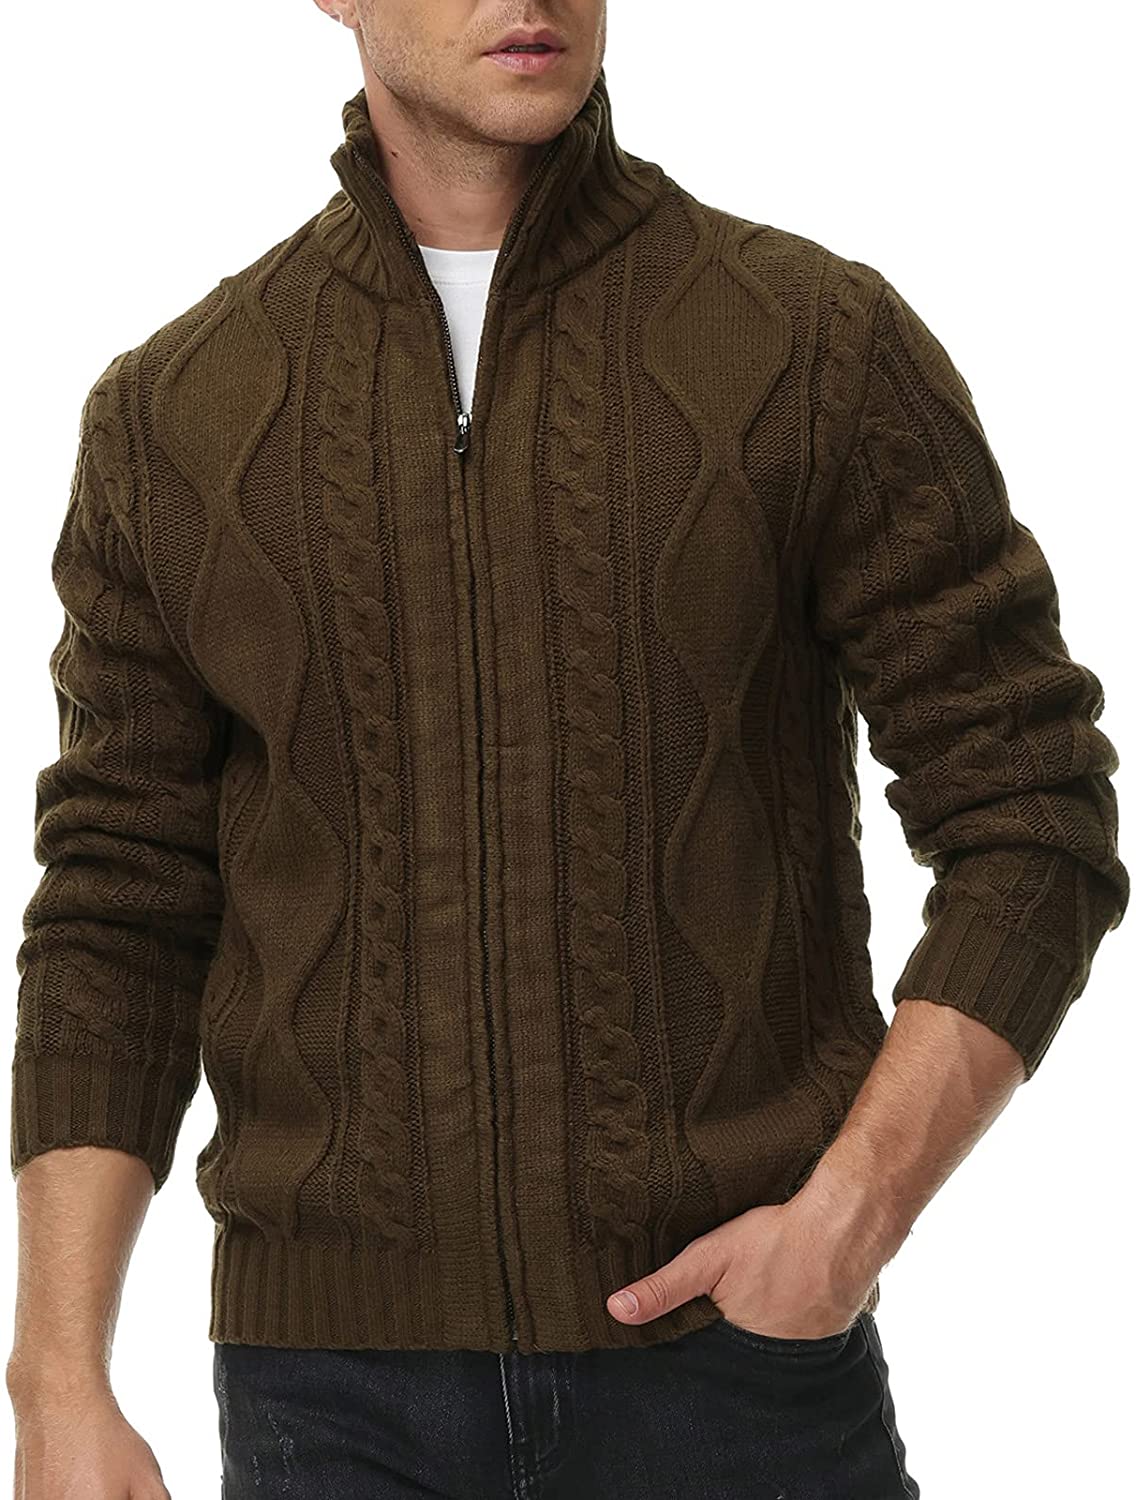 PAUL JONES Mens Stand Collar Cable Knitted Button Cardigan Sweater